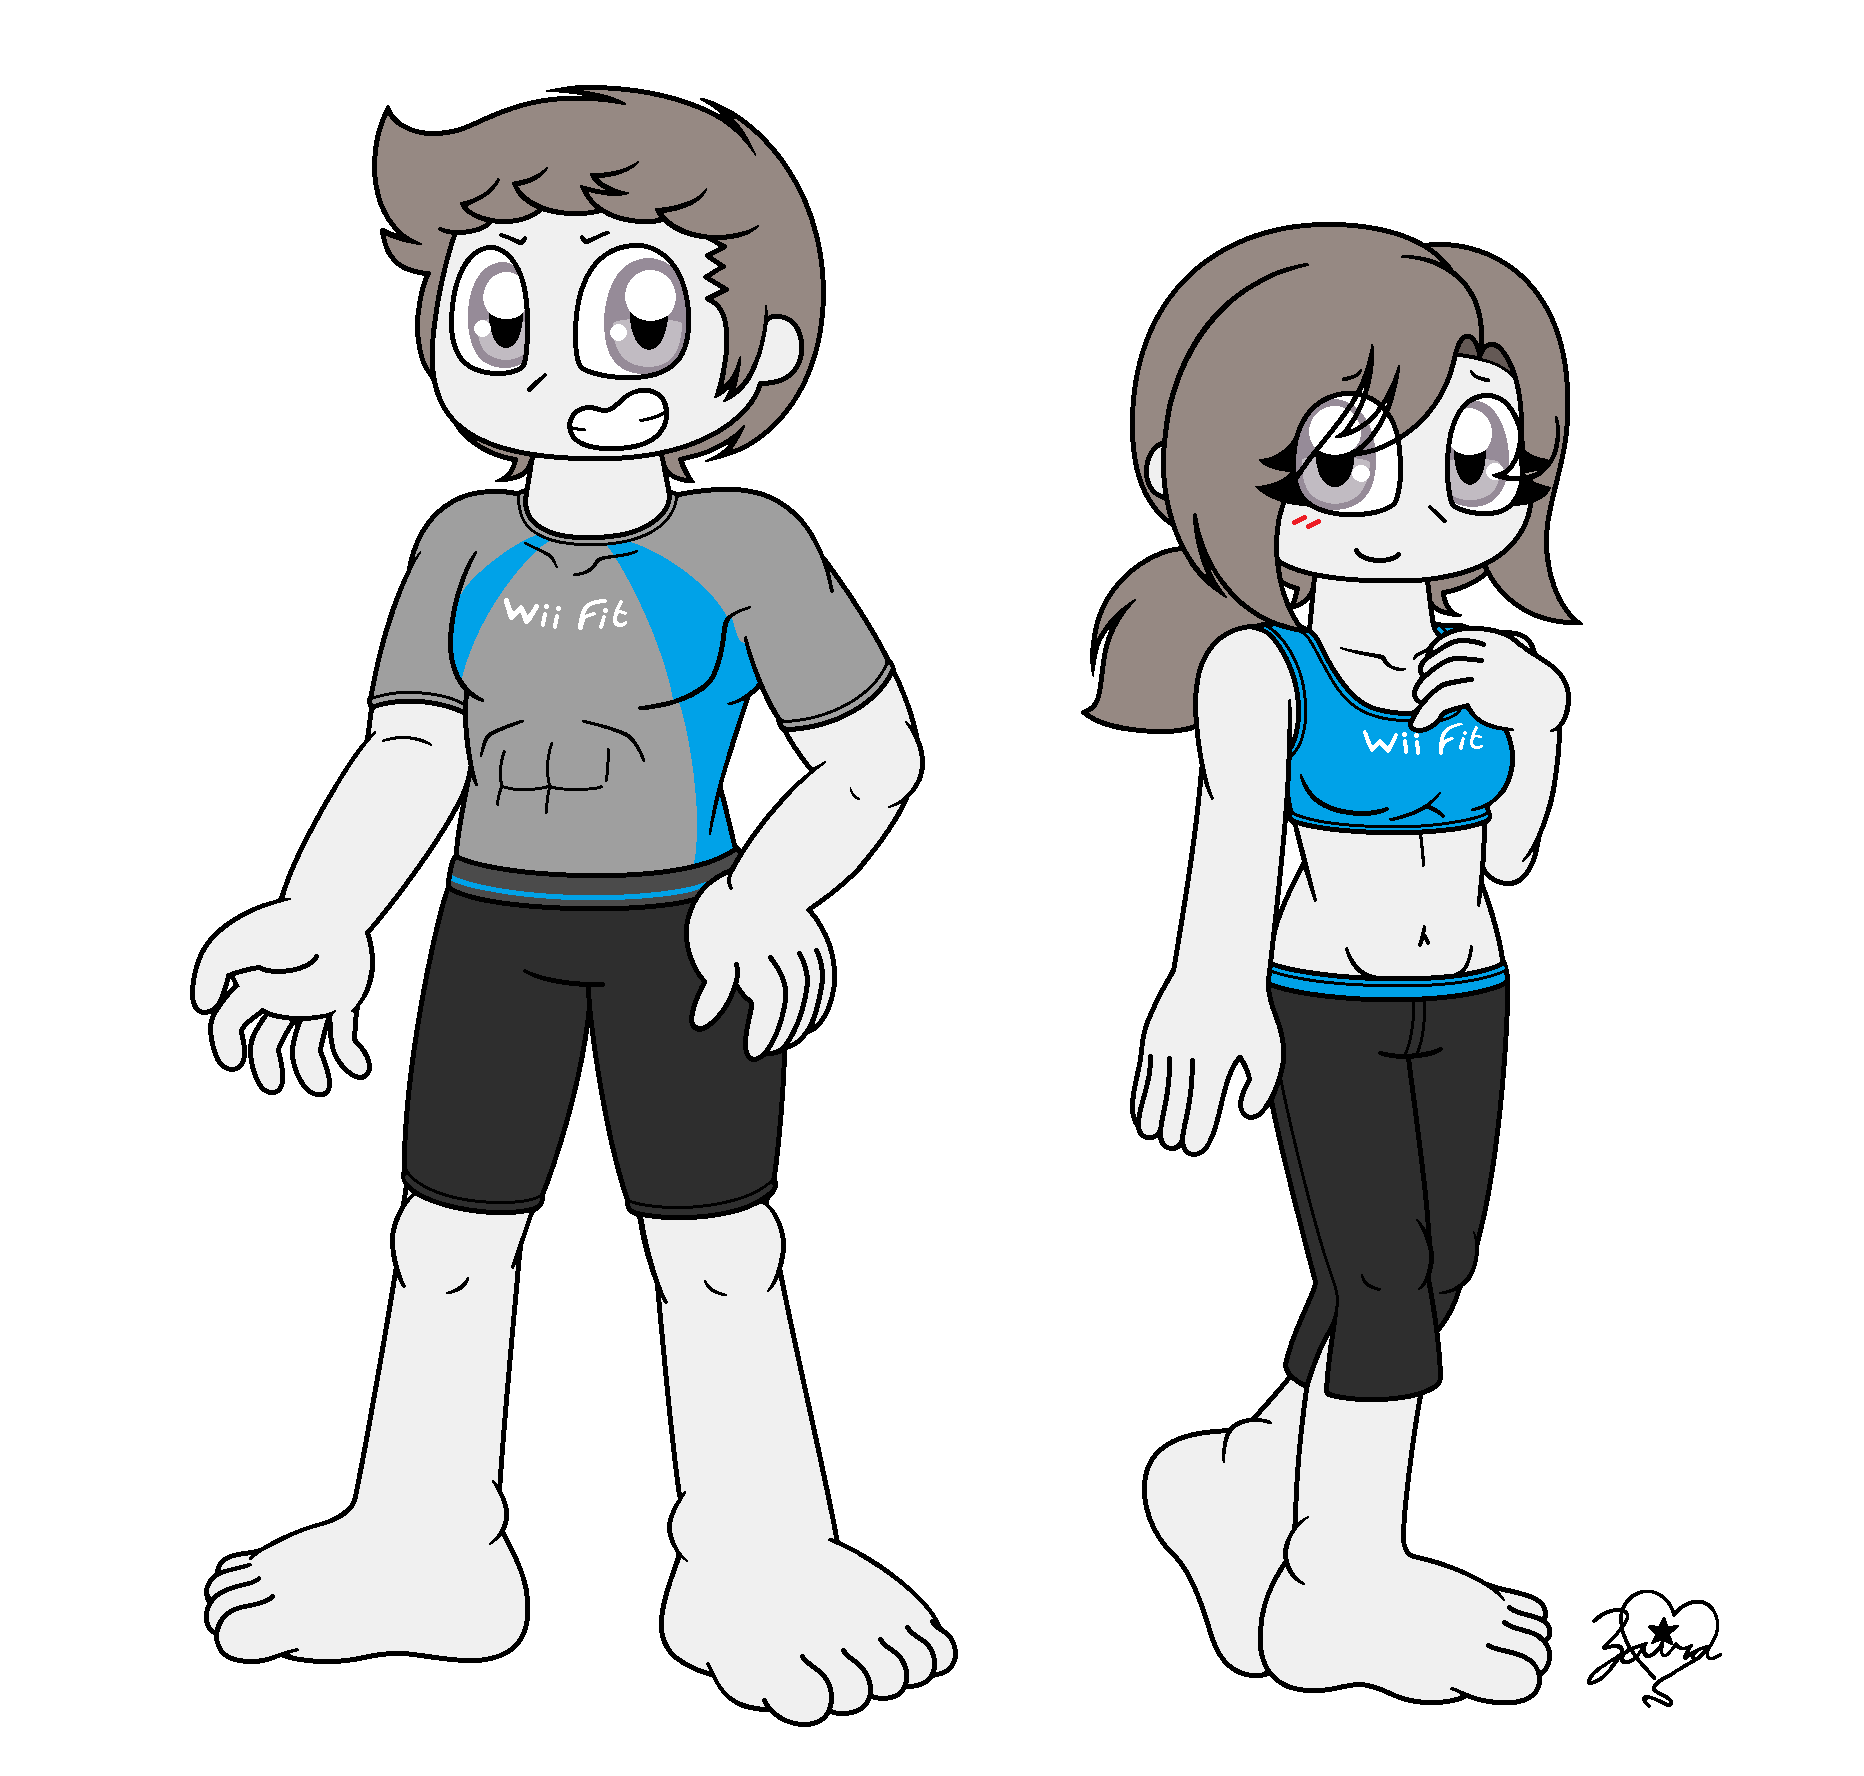 Wii Fit Trainers By The9lord On Deviantart 